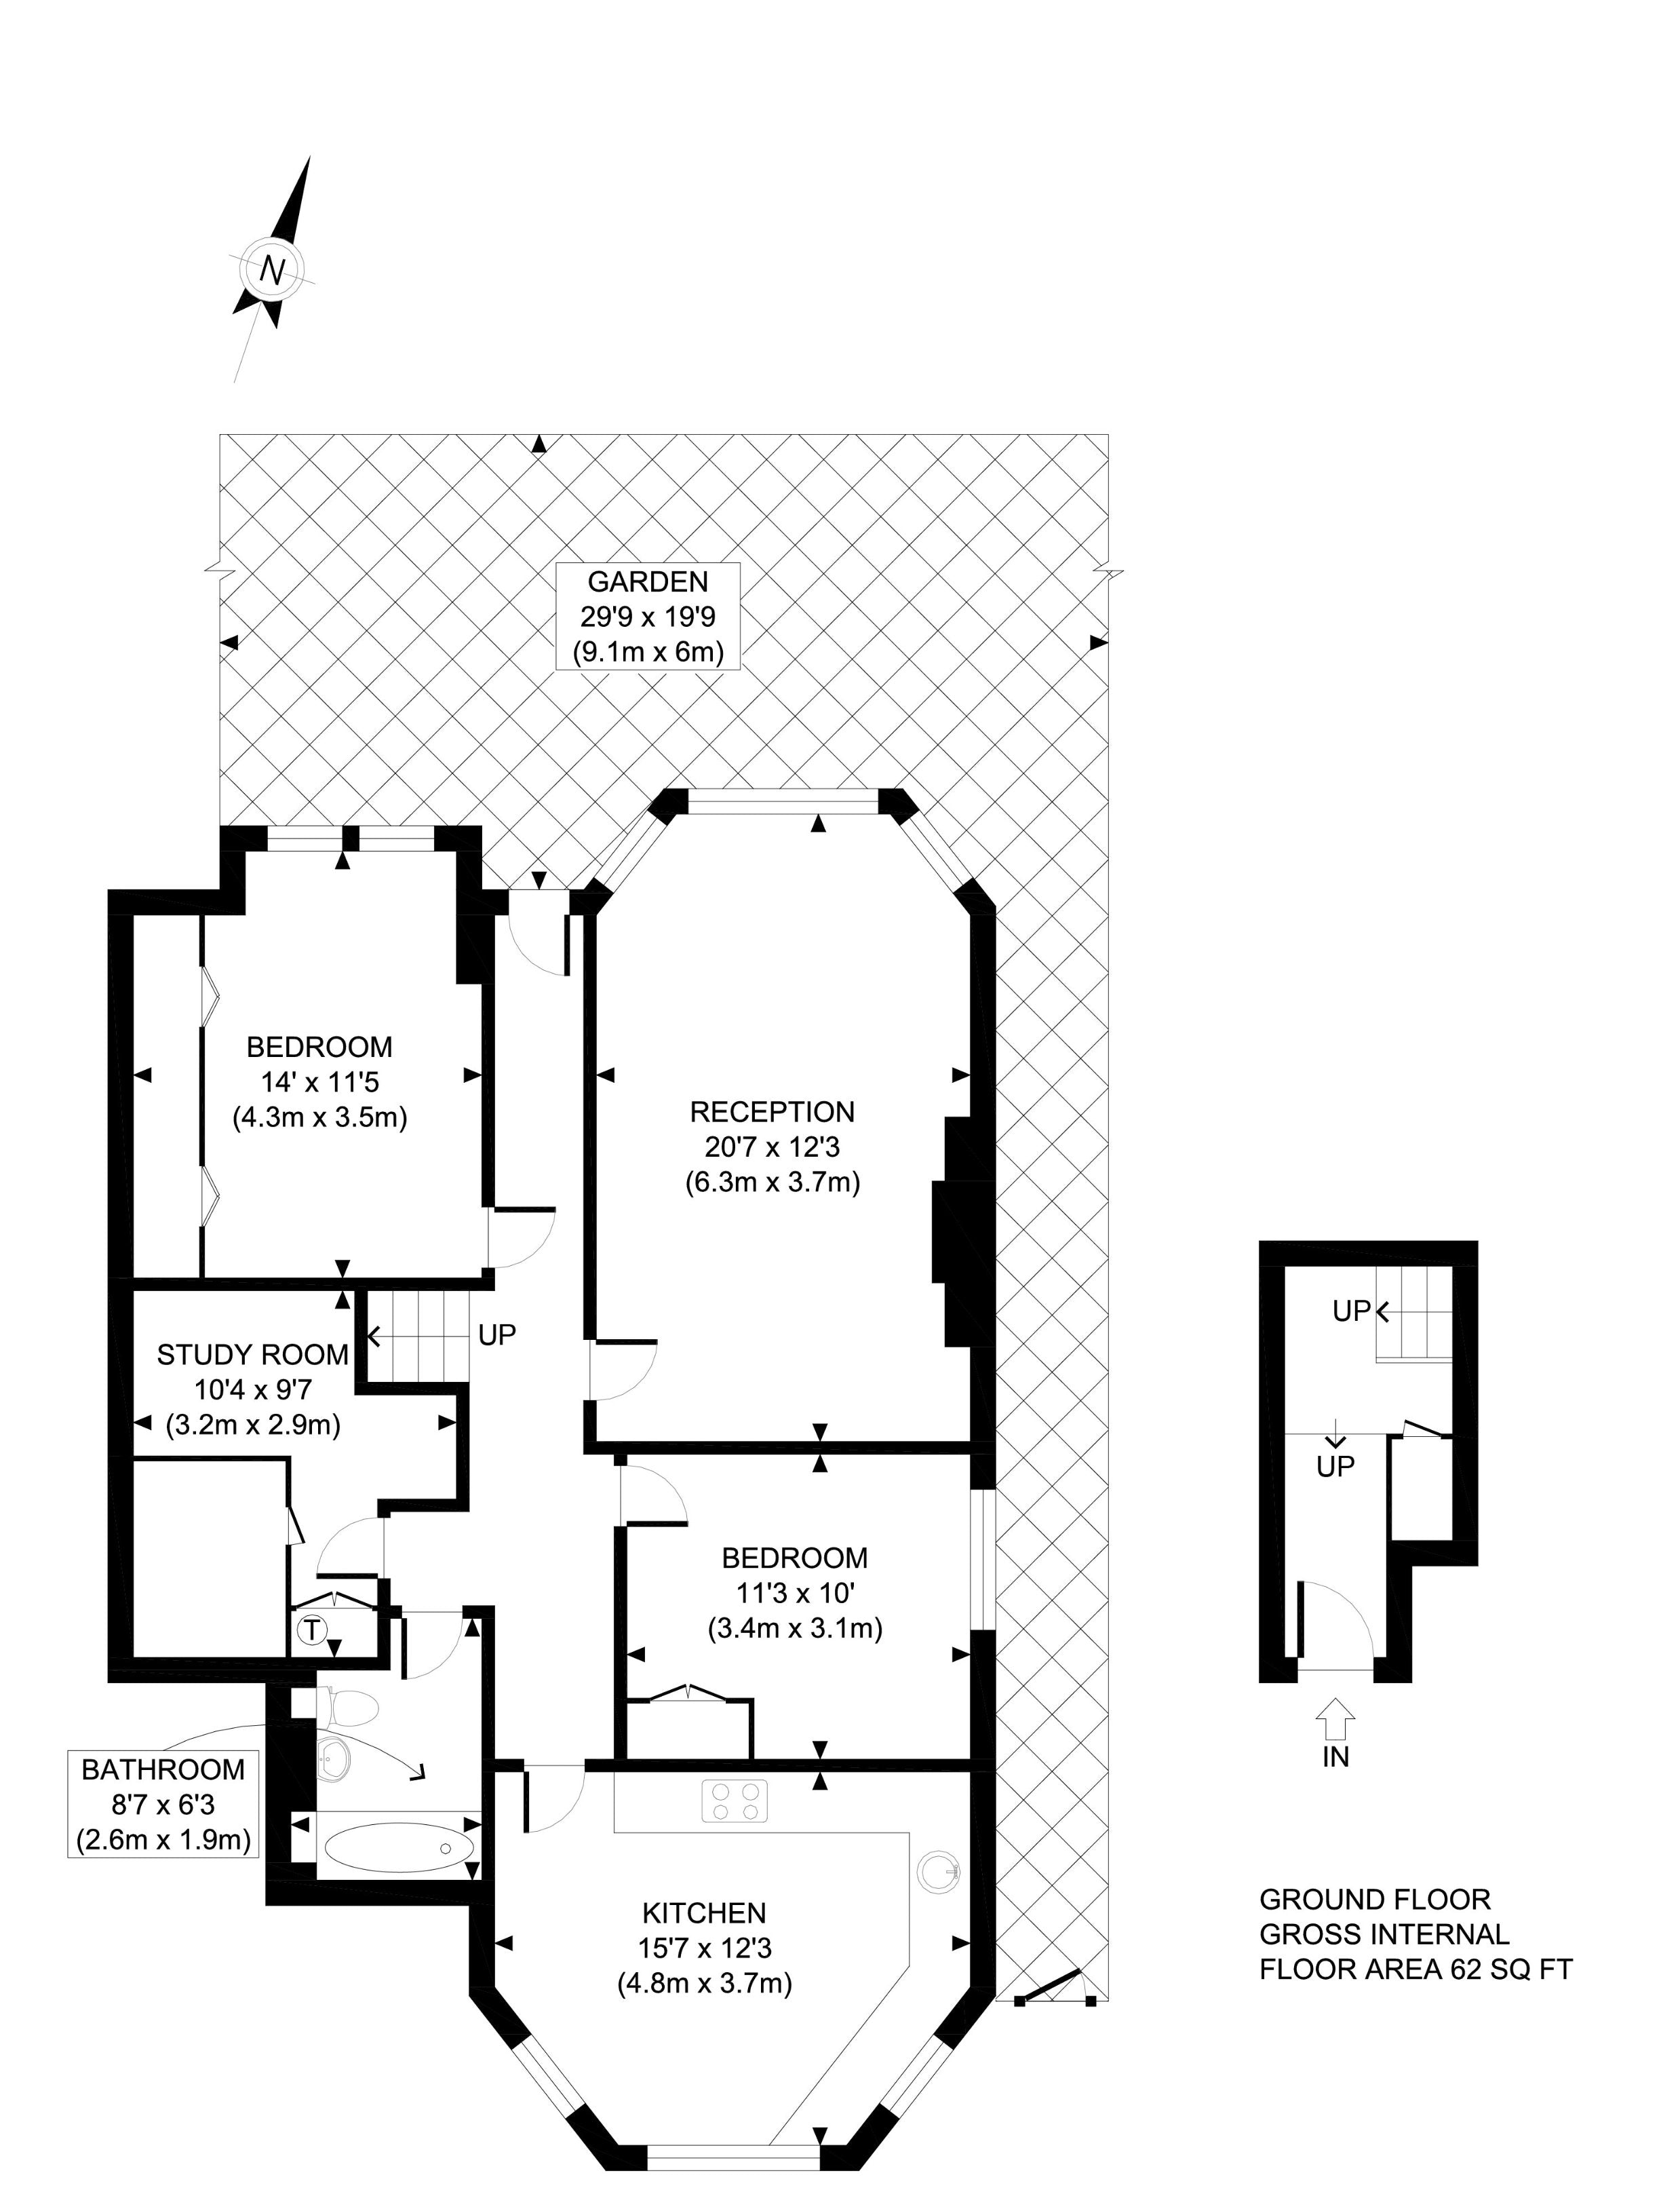 Floor Plan for Residential Properties (With site Visit UK Only)